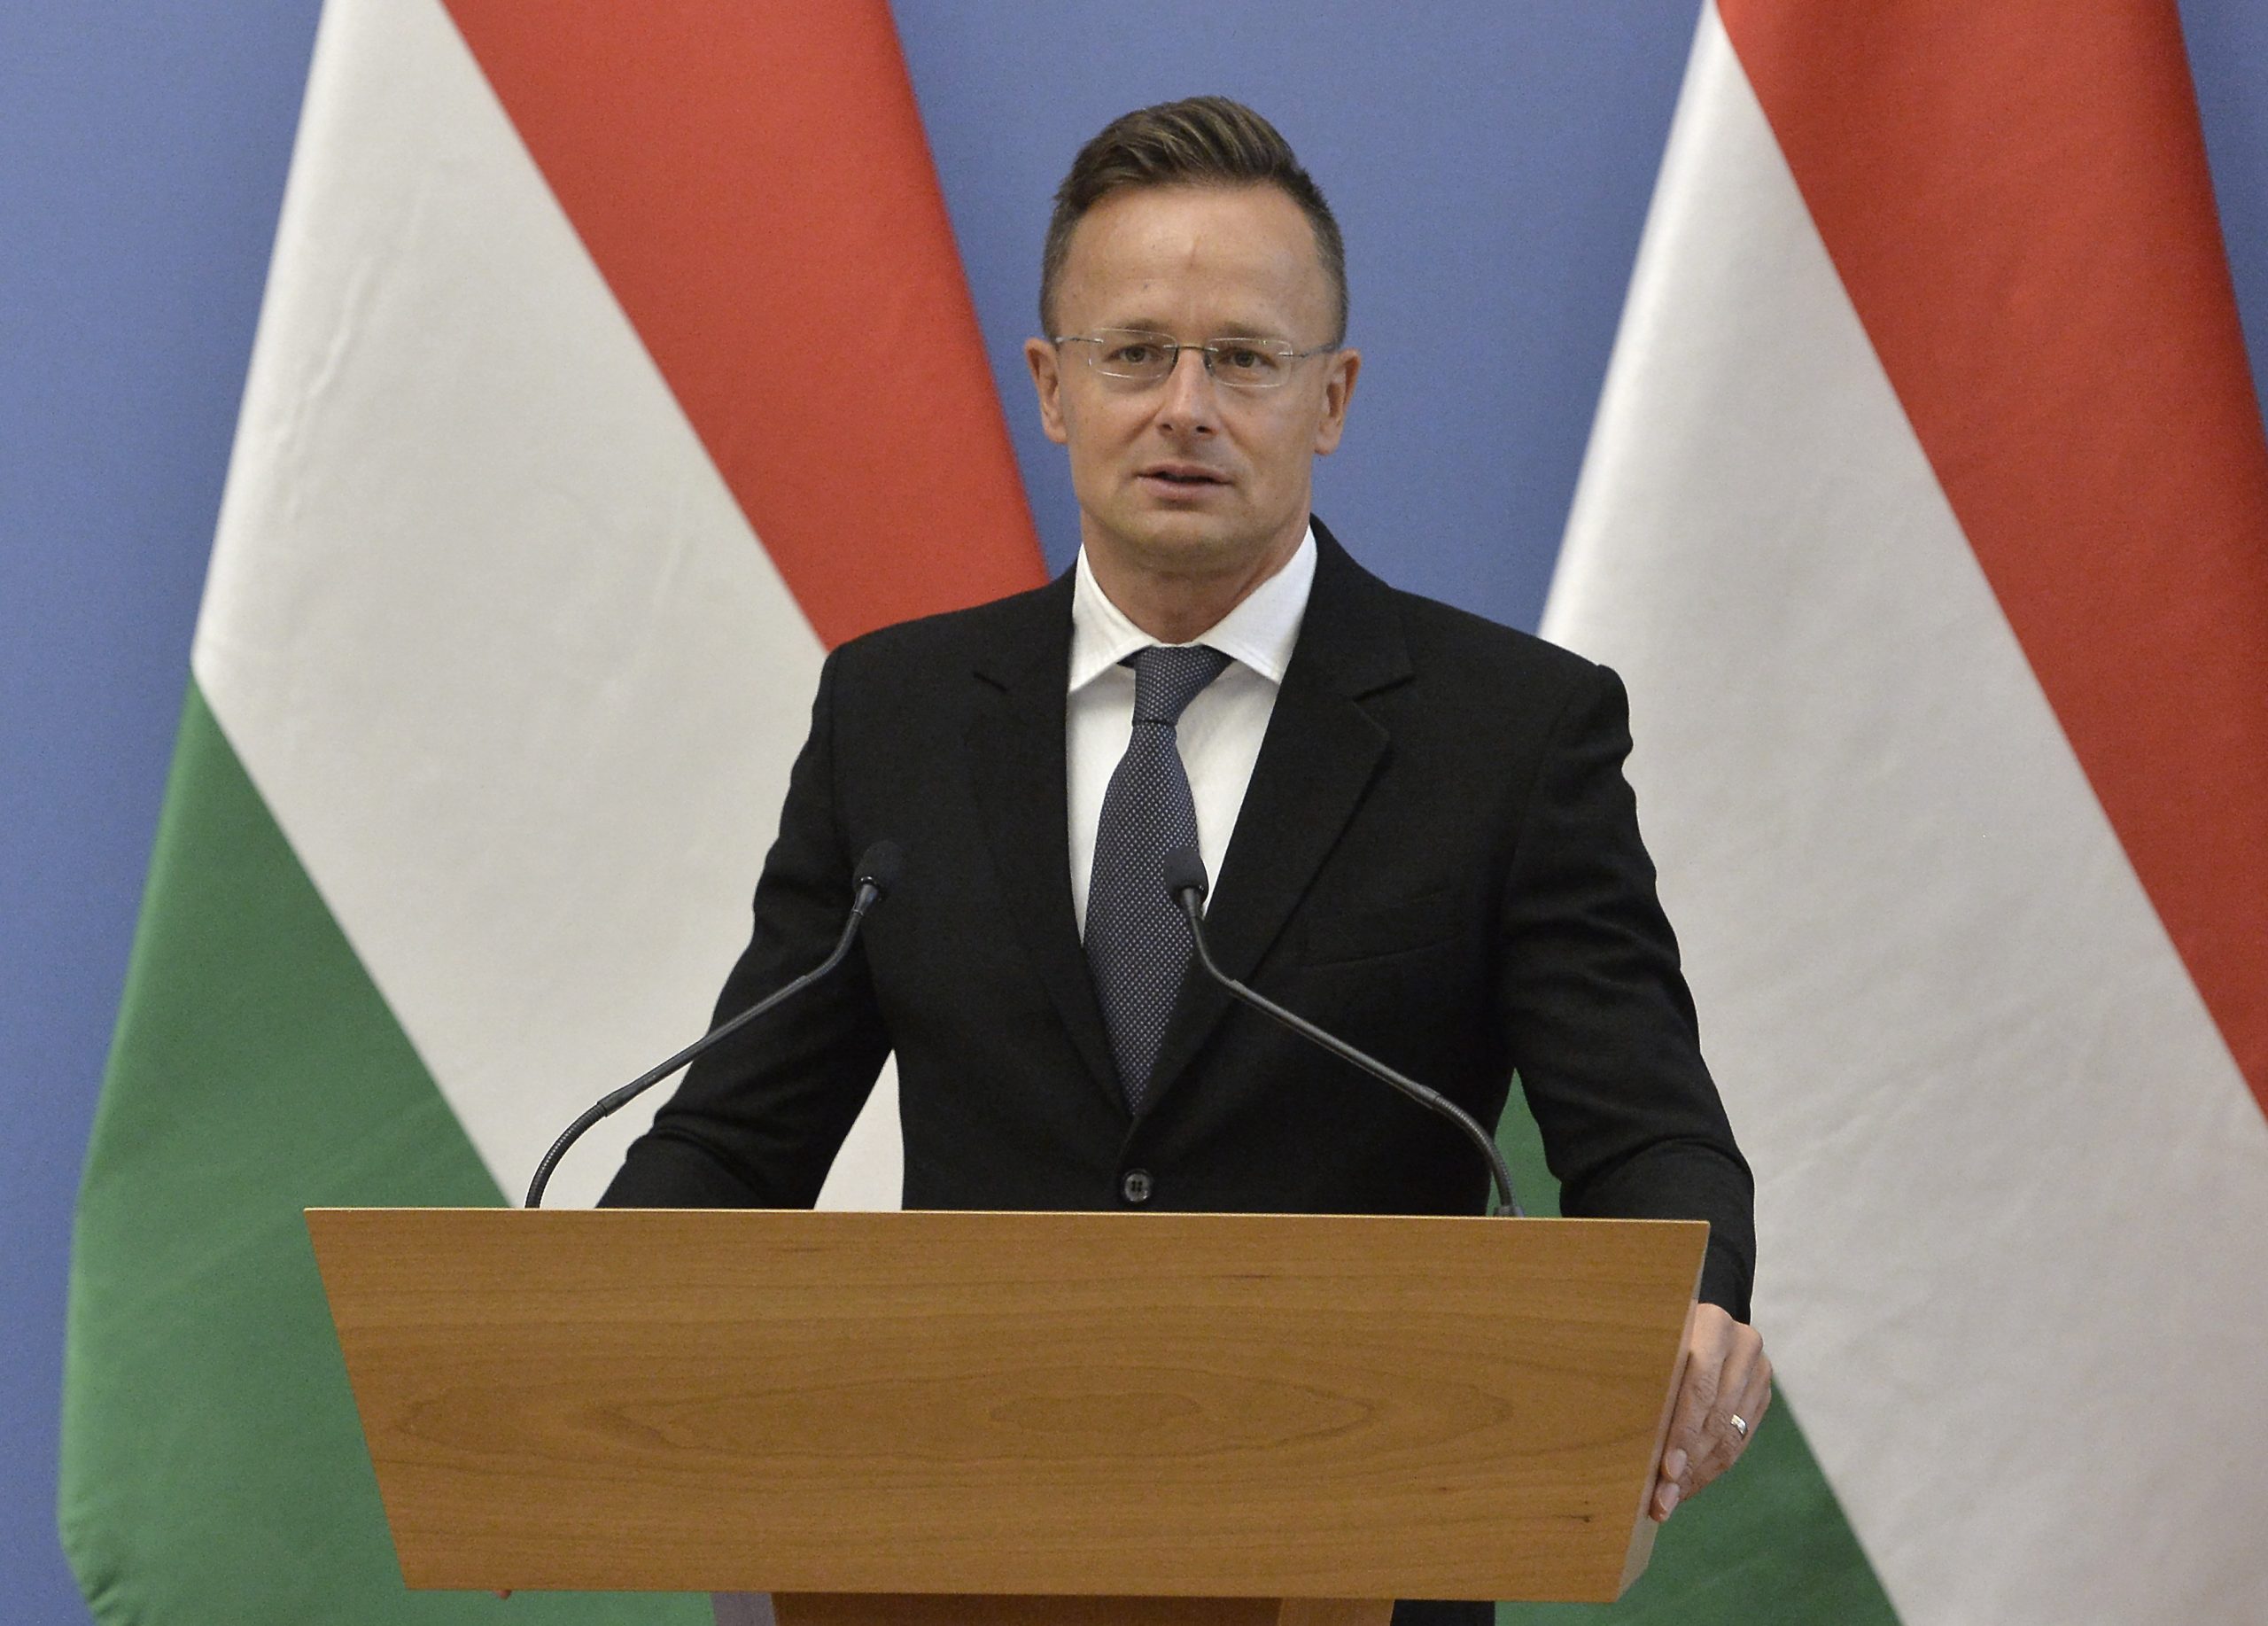 FM Szijjártó: Supporting Ethnic Hungarians Key Focus of Govt's Foreign Policy